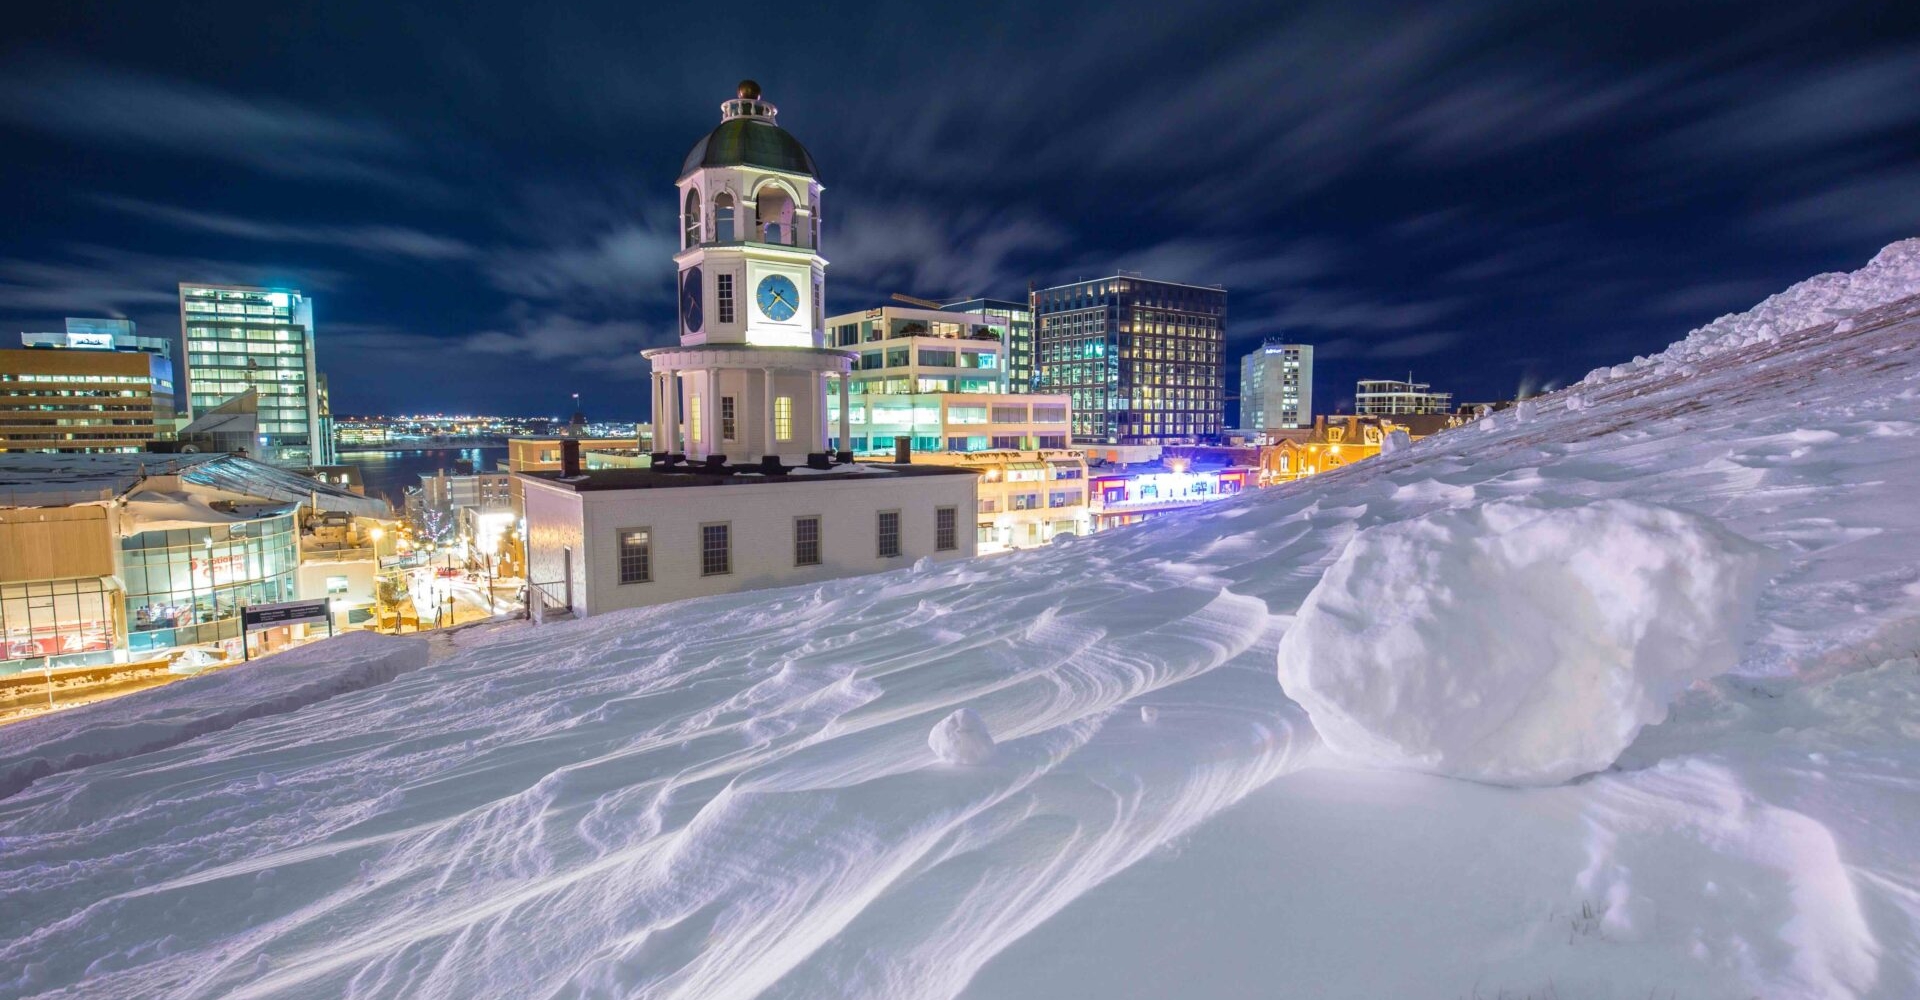 Picture of downtown halifax at night taken from Citadel hill. The town clock is in the foreground, with the hill covered in blown snow.